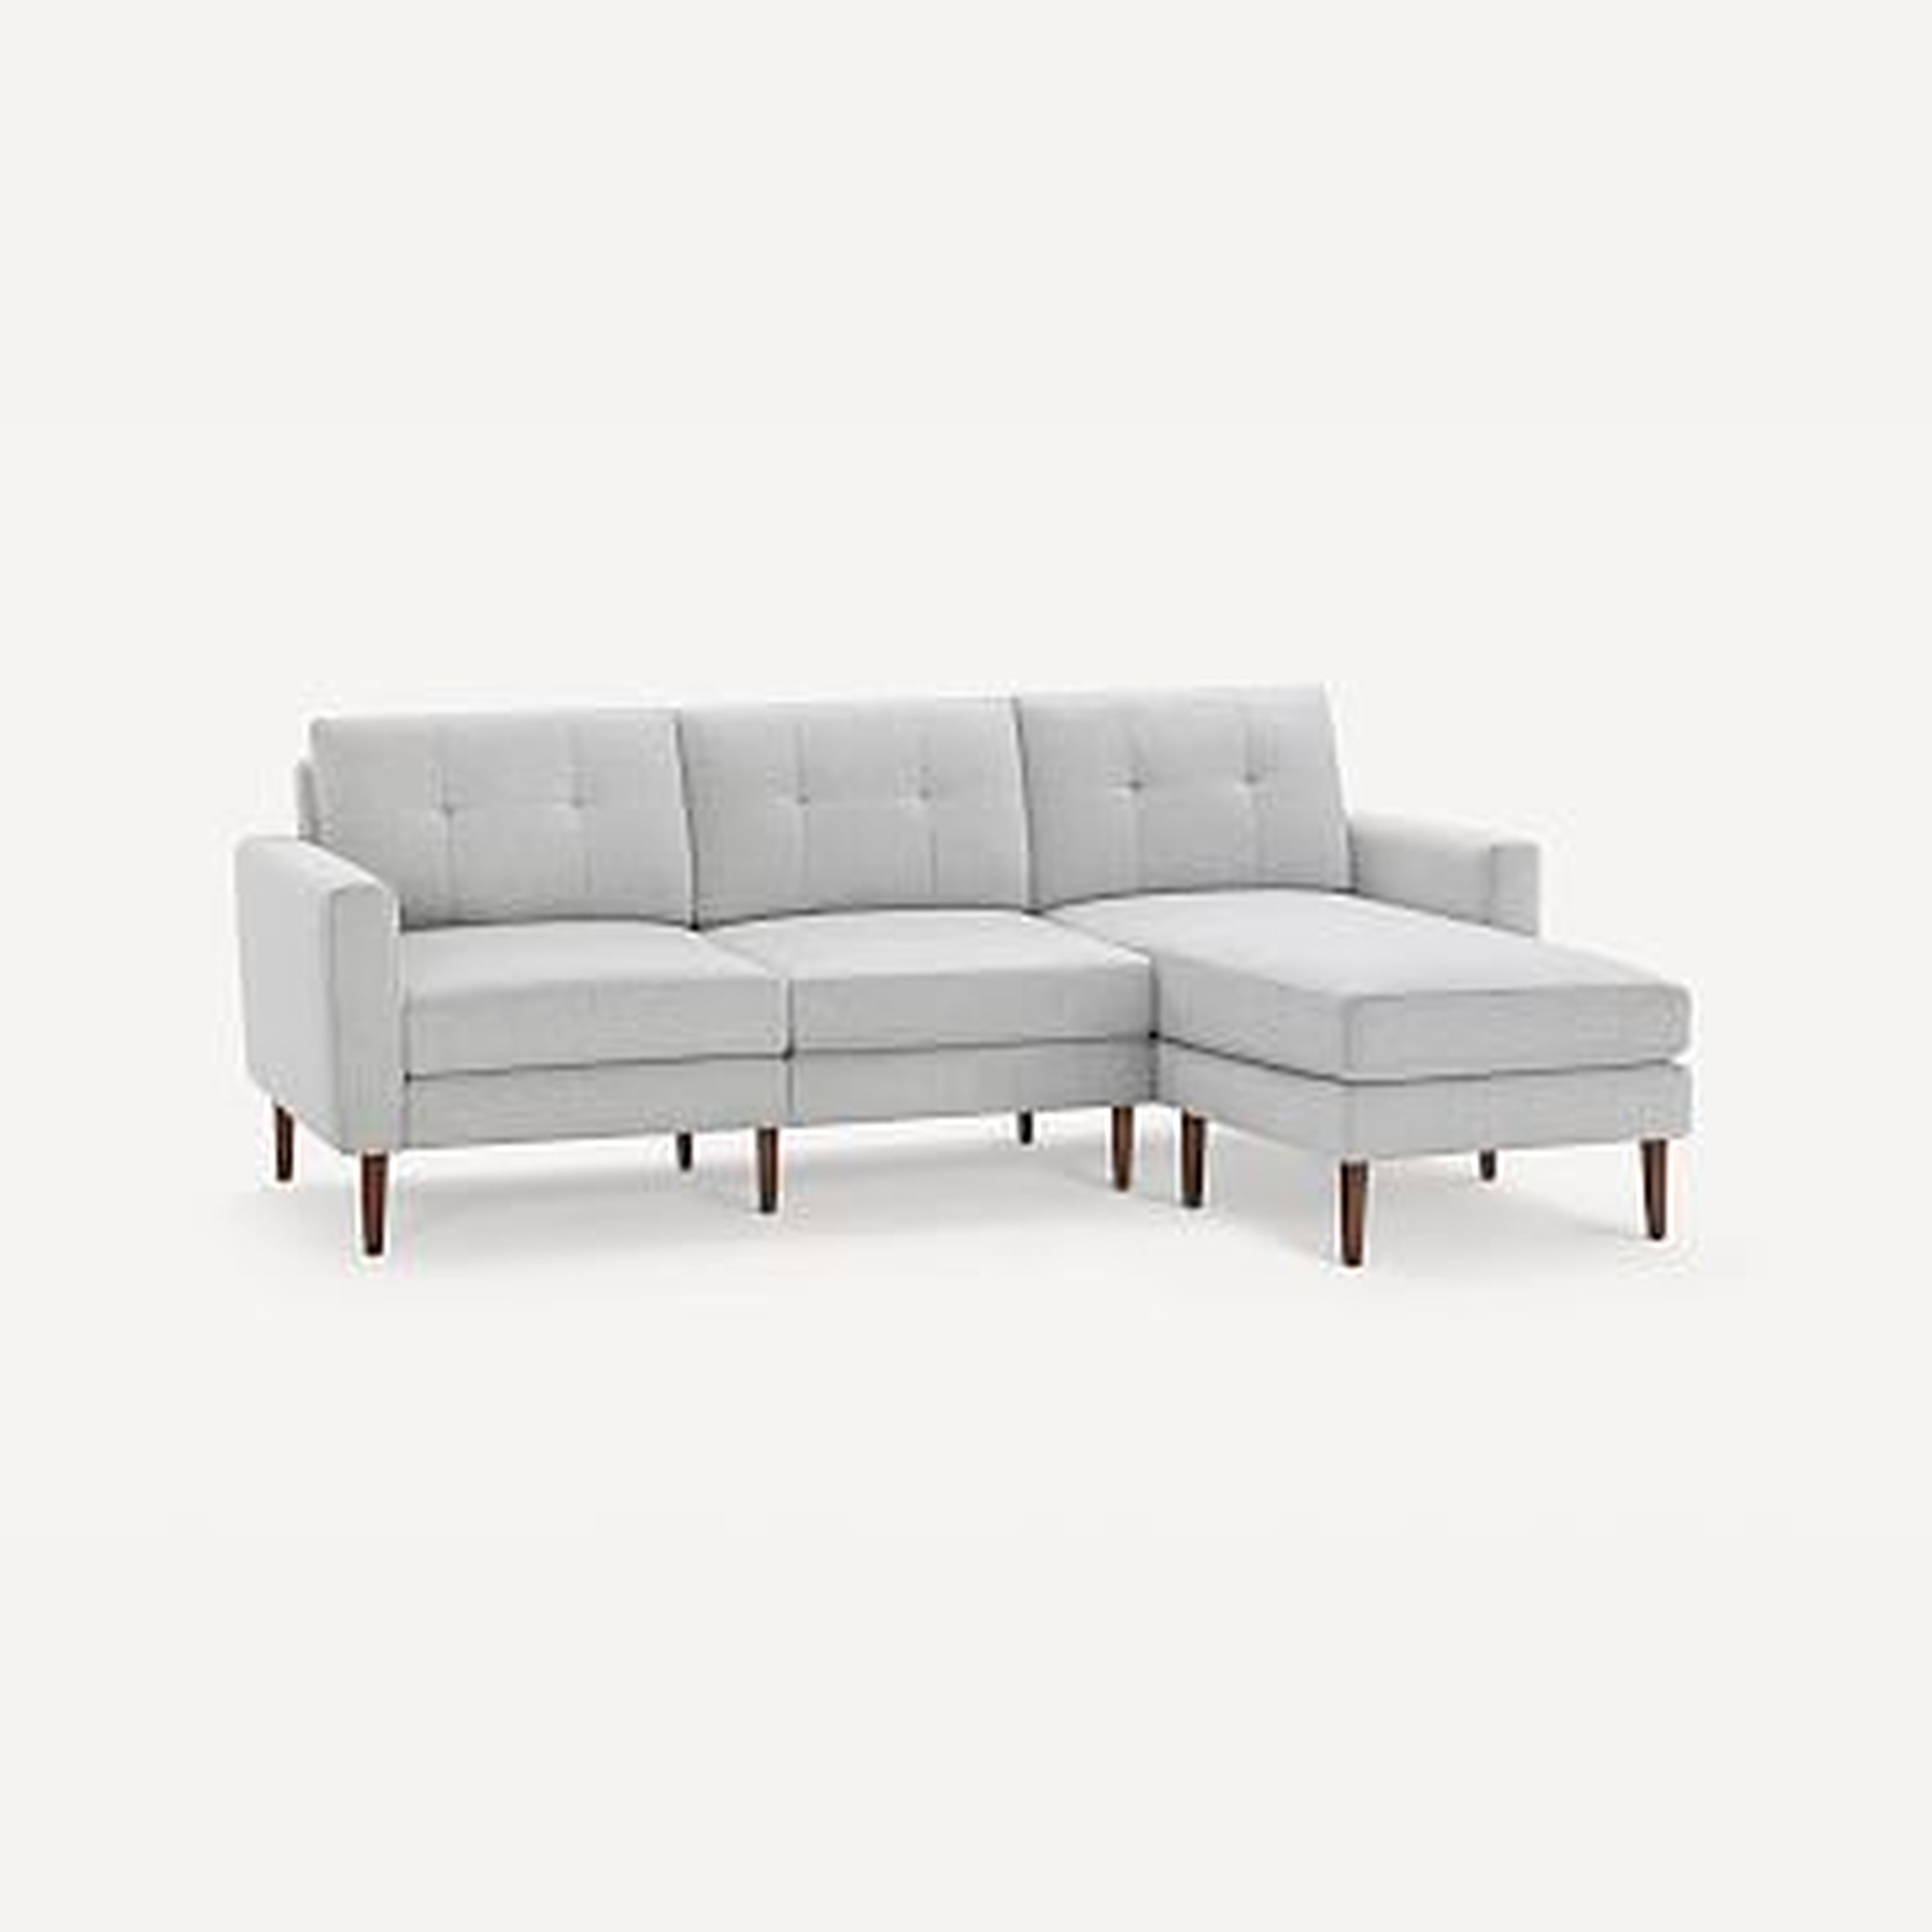 Nomad Block Fabric Sofa with Chaise, Olefin, Crushed Gravel, Walnut Wood - West Elm